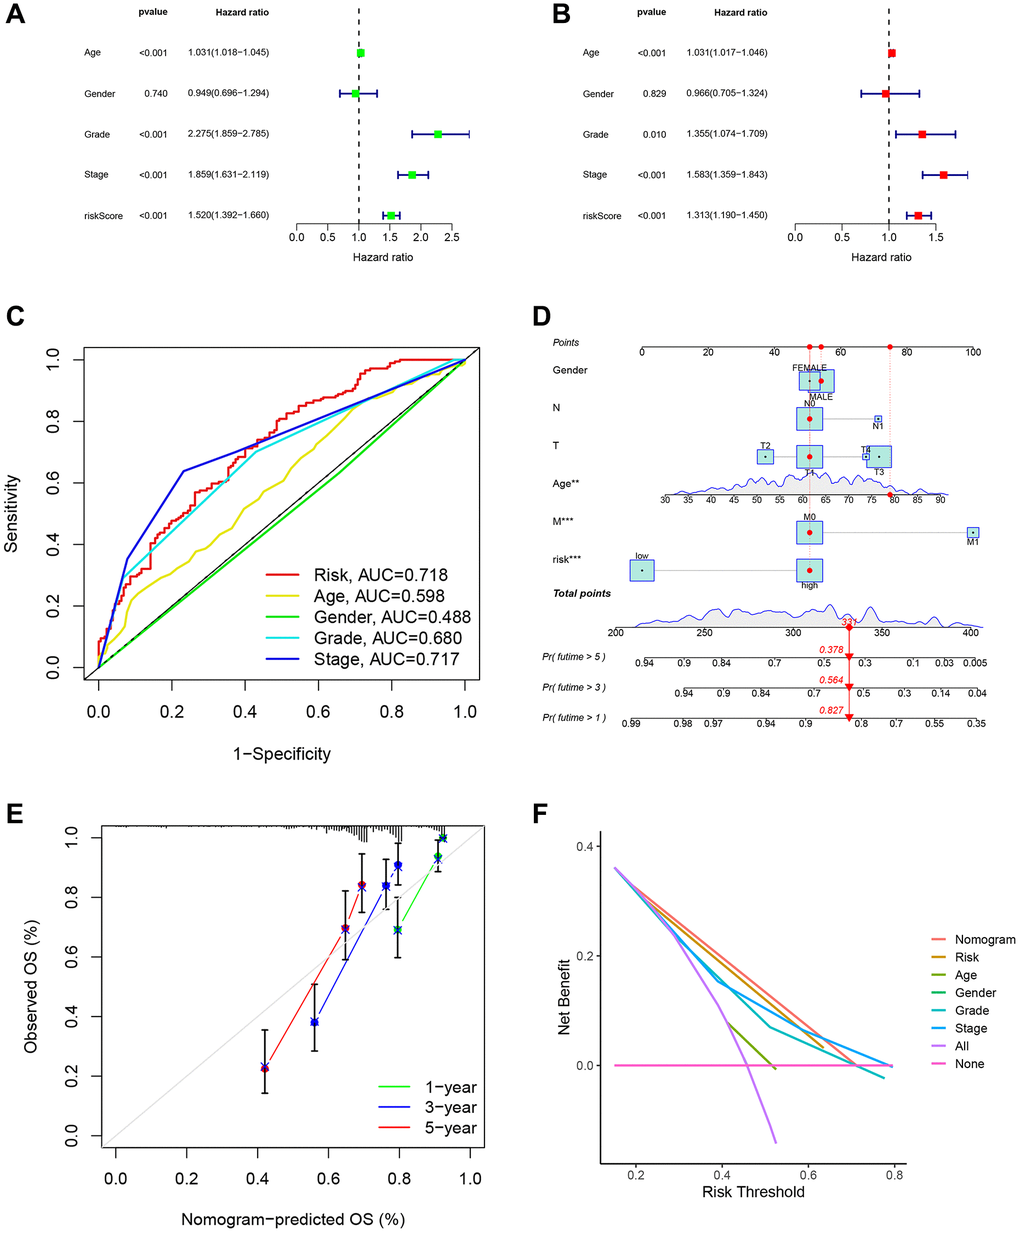 Analysis of the DRG risk score model and clinical indicator. (A) Univariate regression analyses demonstrated the risk model as an independent prognostic indicator. (B) Multivariate regression analyses demonstrated the risk model as an independent prognostic indicator. (C) The clinROC curves with risk score models and common clinical indicators. (D) The nomogram predicted patient OS in the 1st, 3rd, and 5th years. (E) The calibration curves displayed the accuracy of the nomogram in the 1st, 3rd, and 5th years. (F) The DCA analysis of different indicators.